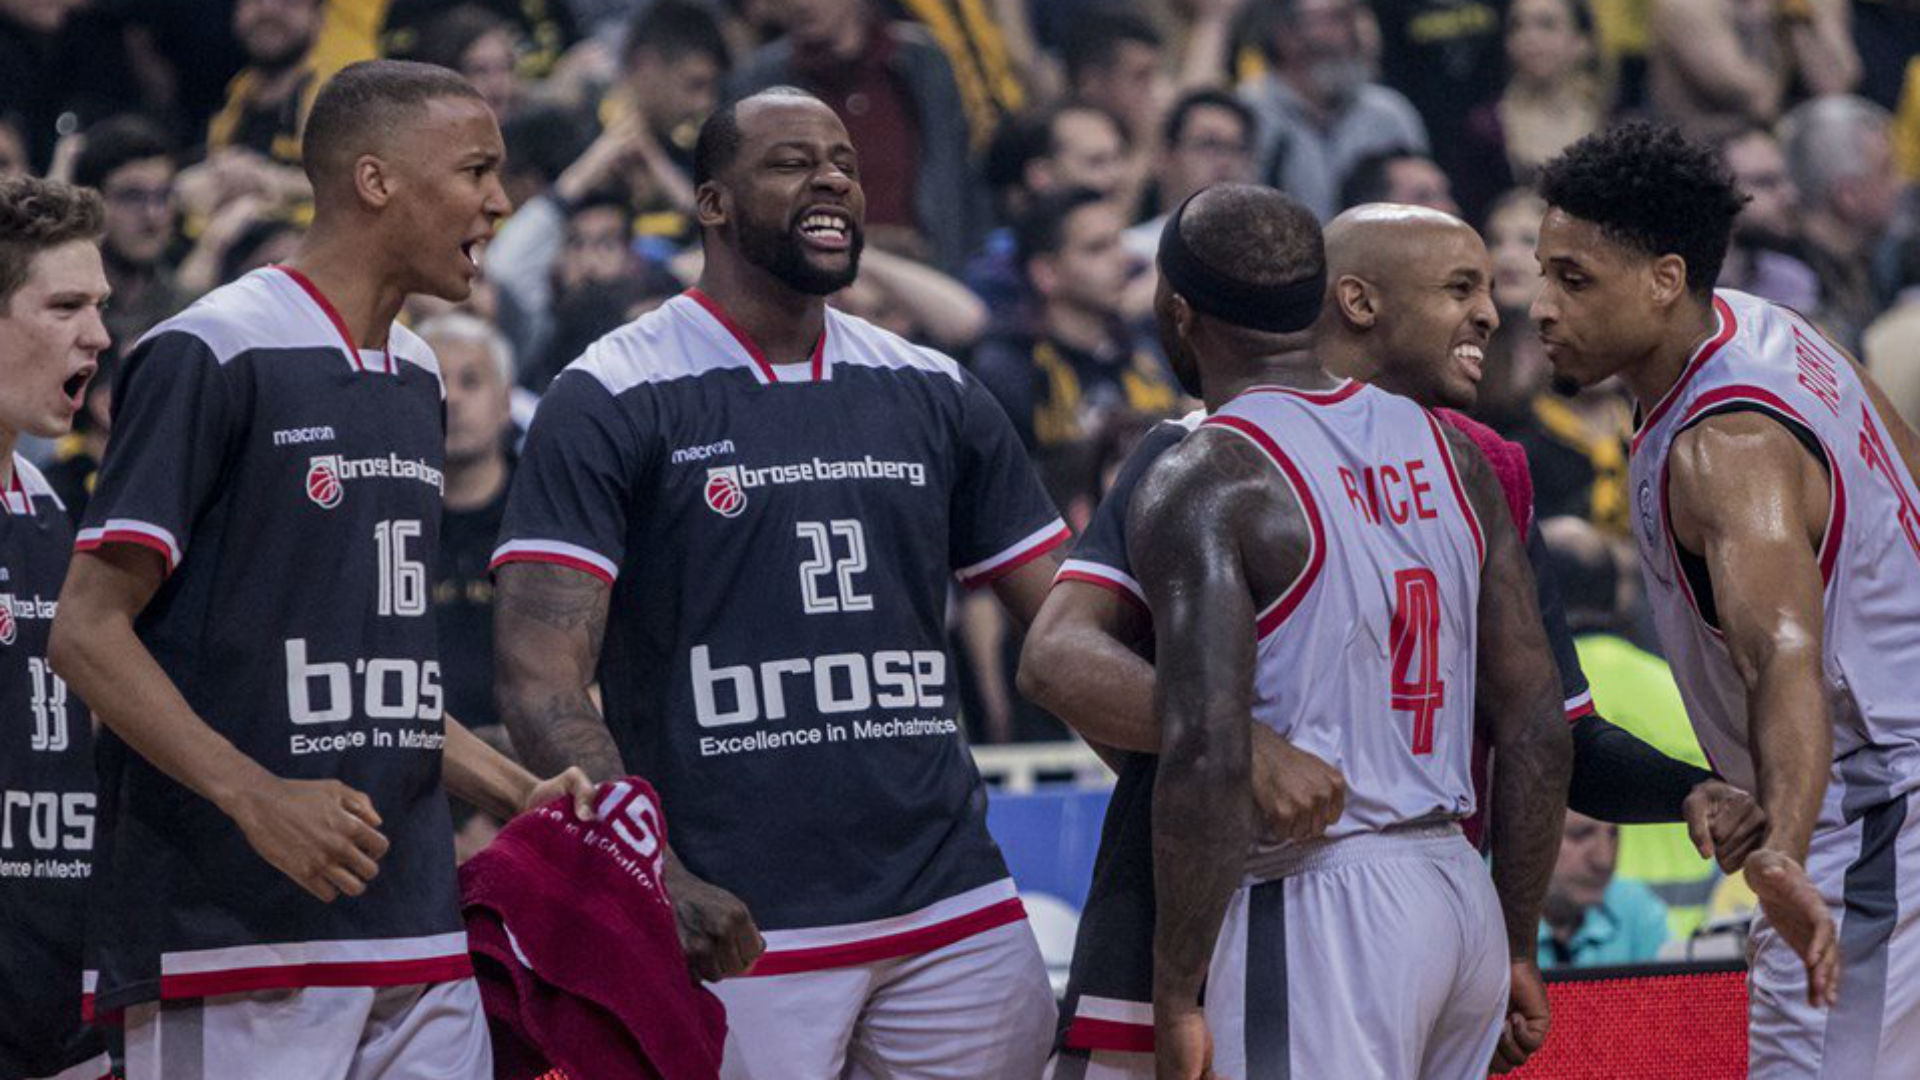 A late floater from Tyrese Rice - who scored 25 points on the night - put Brose Bamberg into the Final Four and ousted the champions.